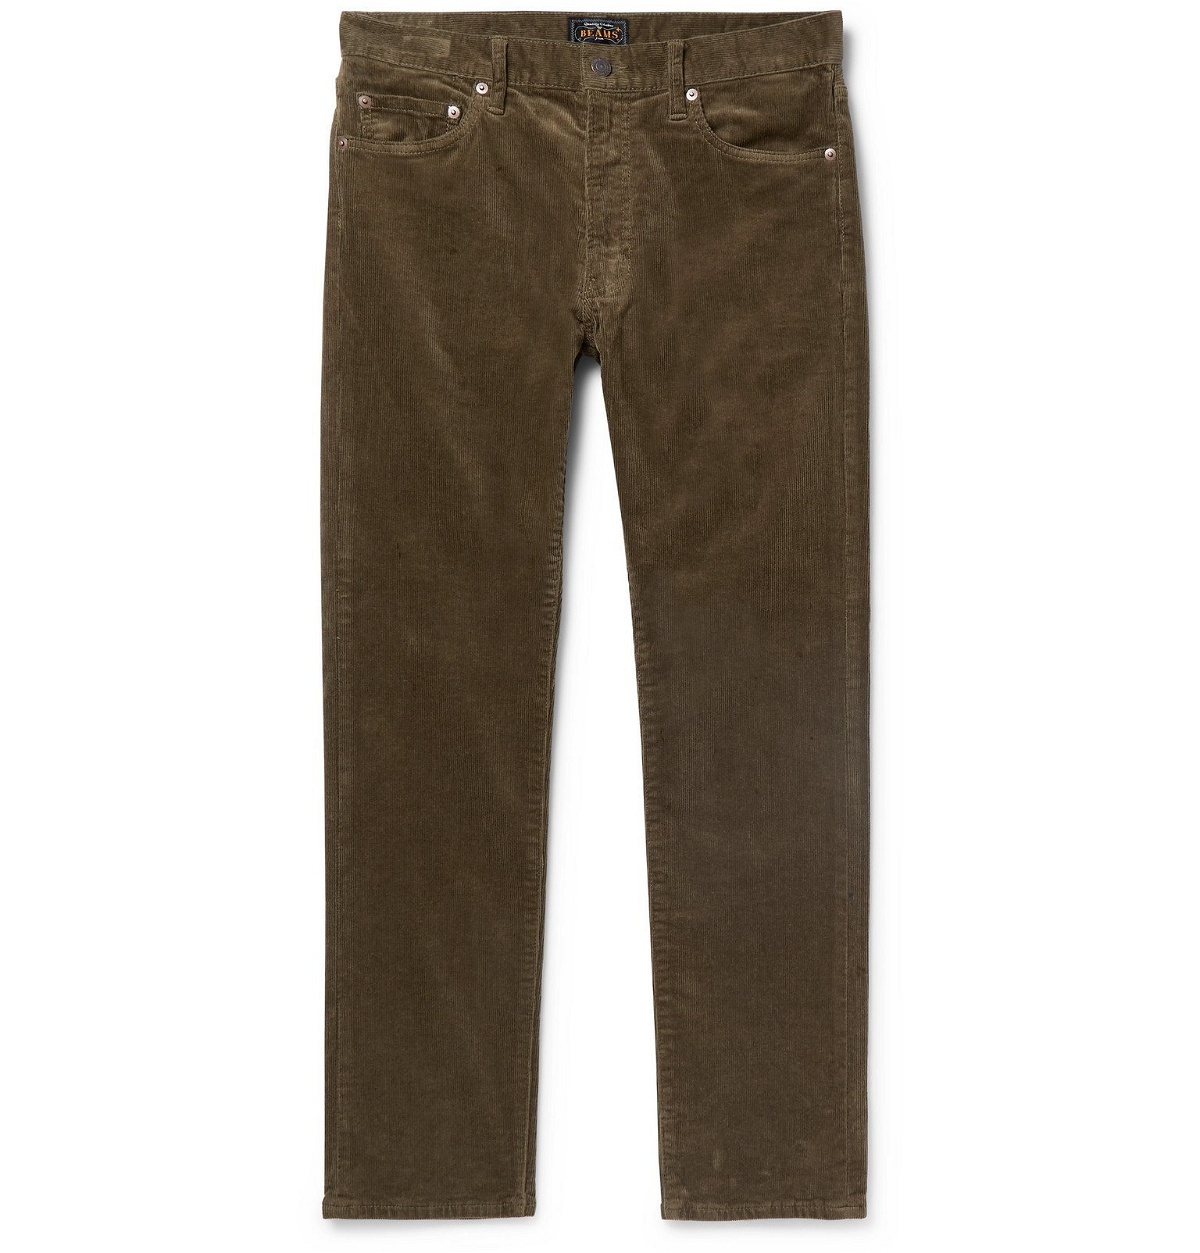 Beams Plus - Slim-Fit Tapered Cotton-Blend Corduroy Trousers - Green ...